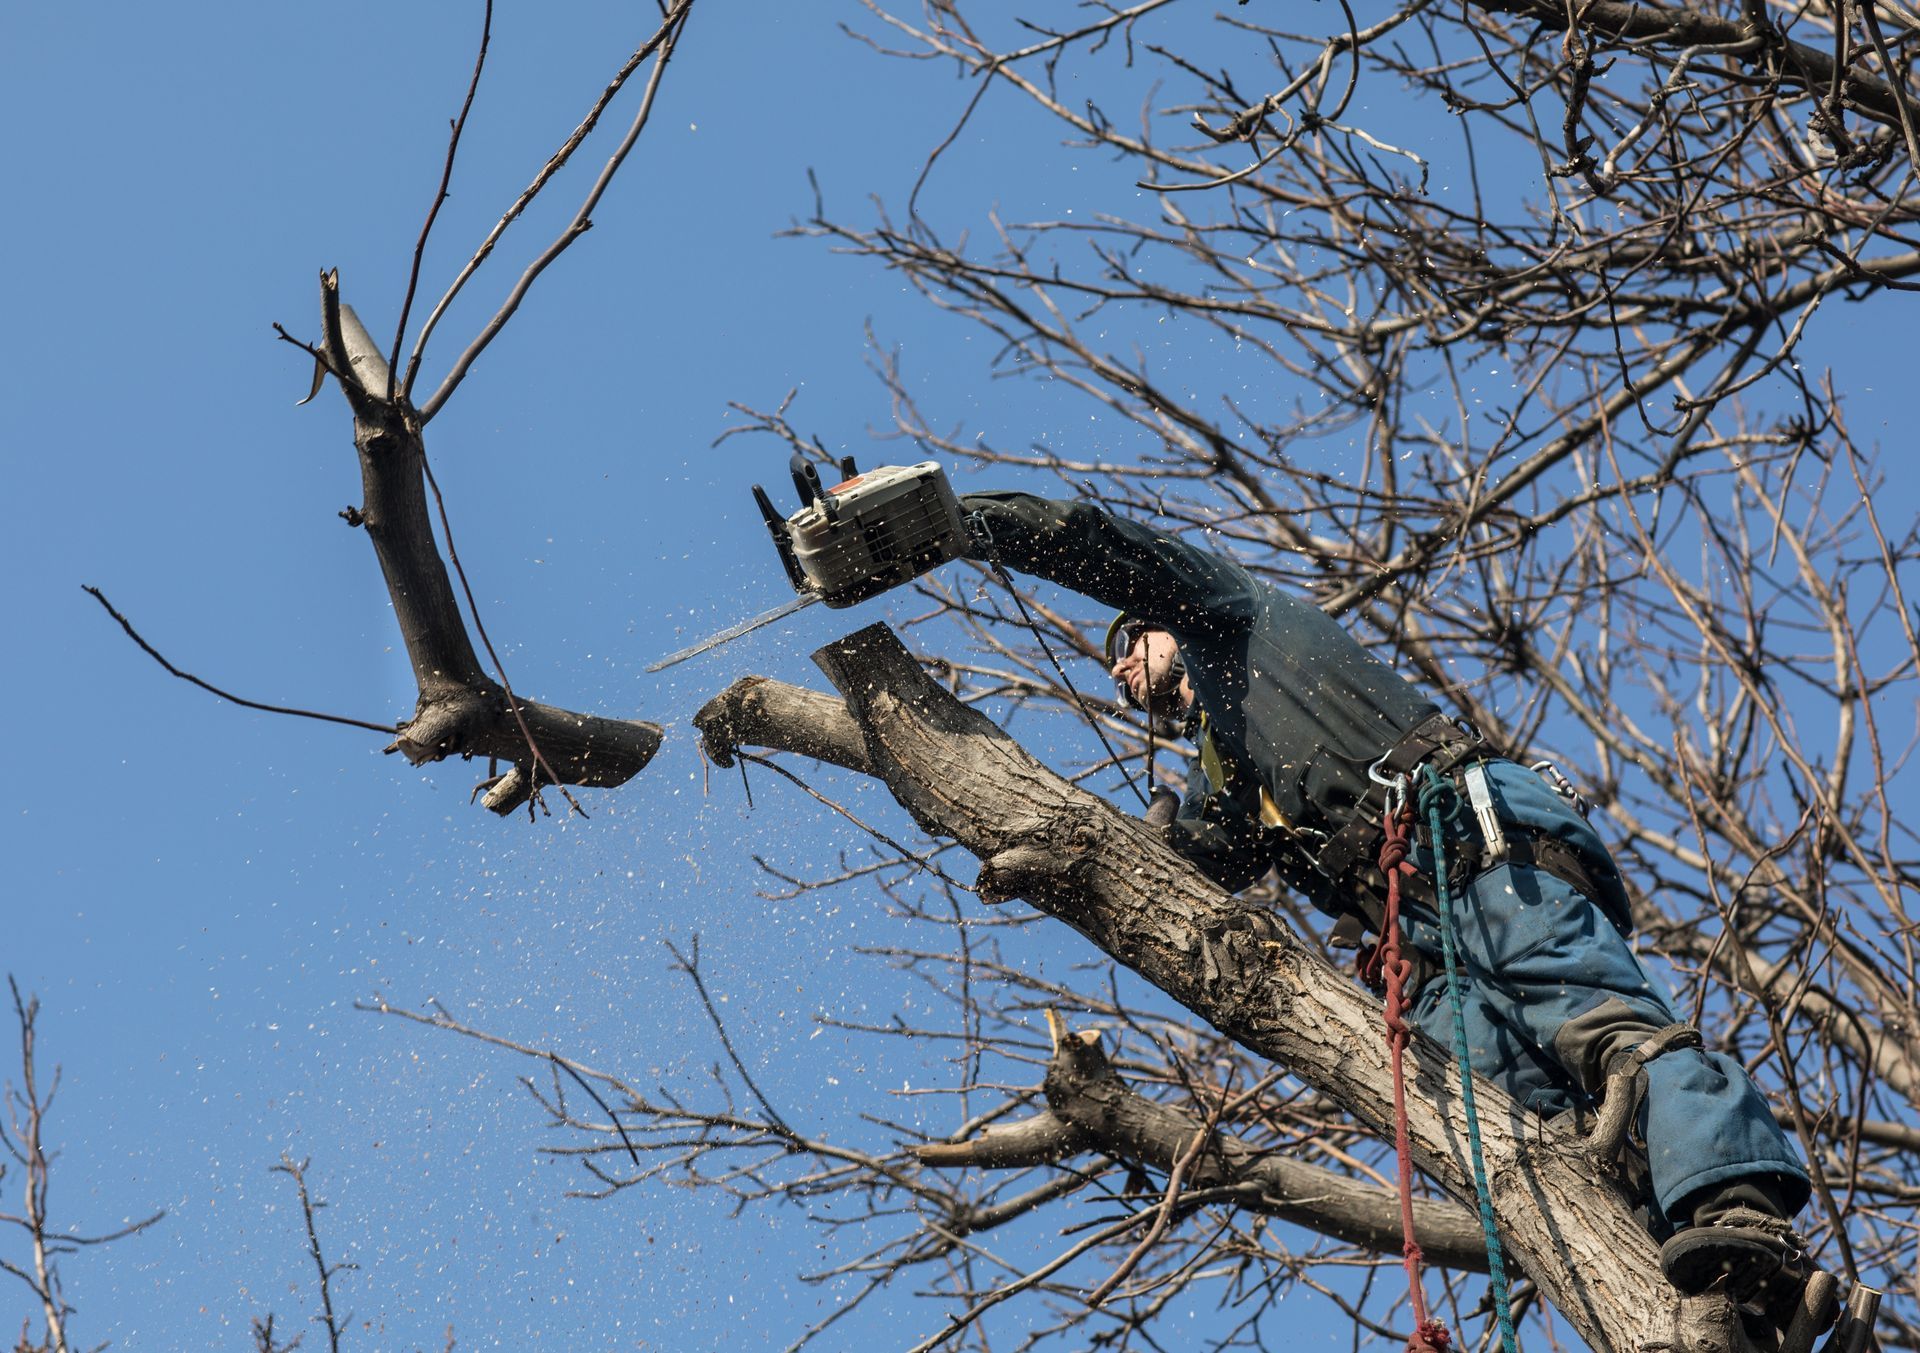 Arborist cuts branches with a chainsaw on a tree